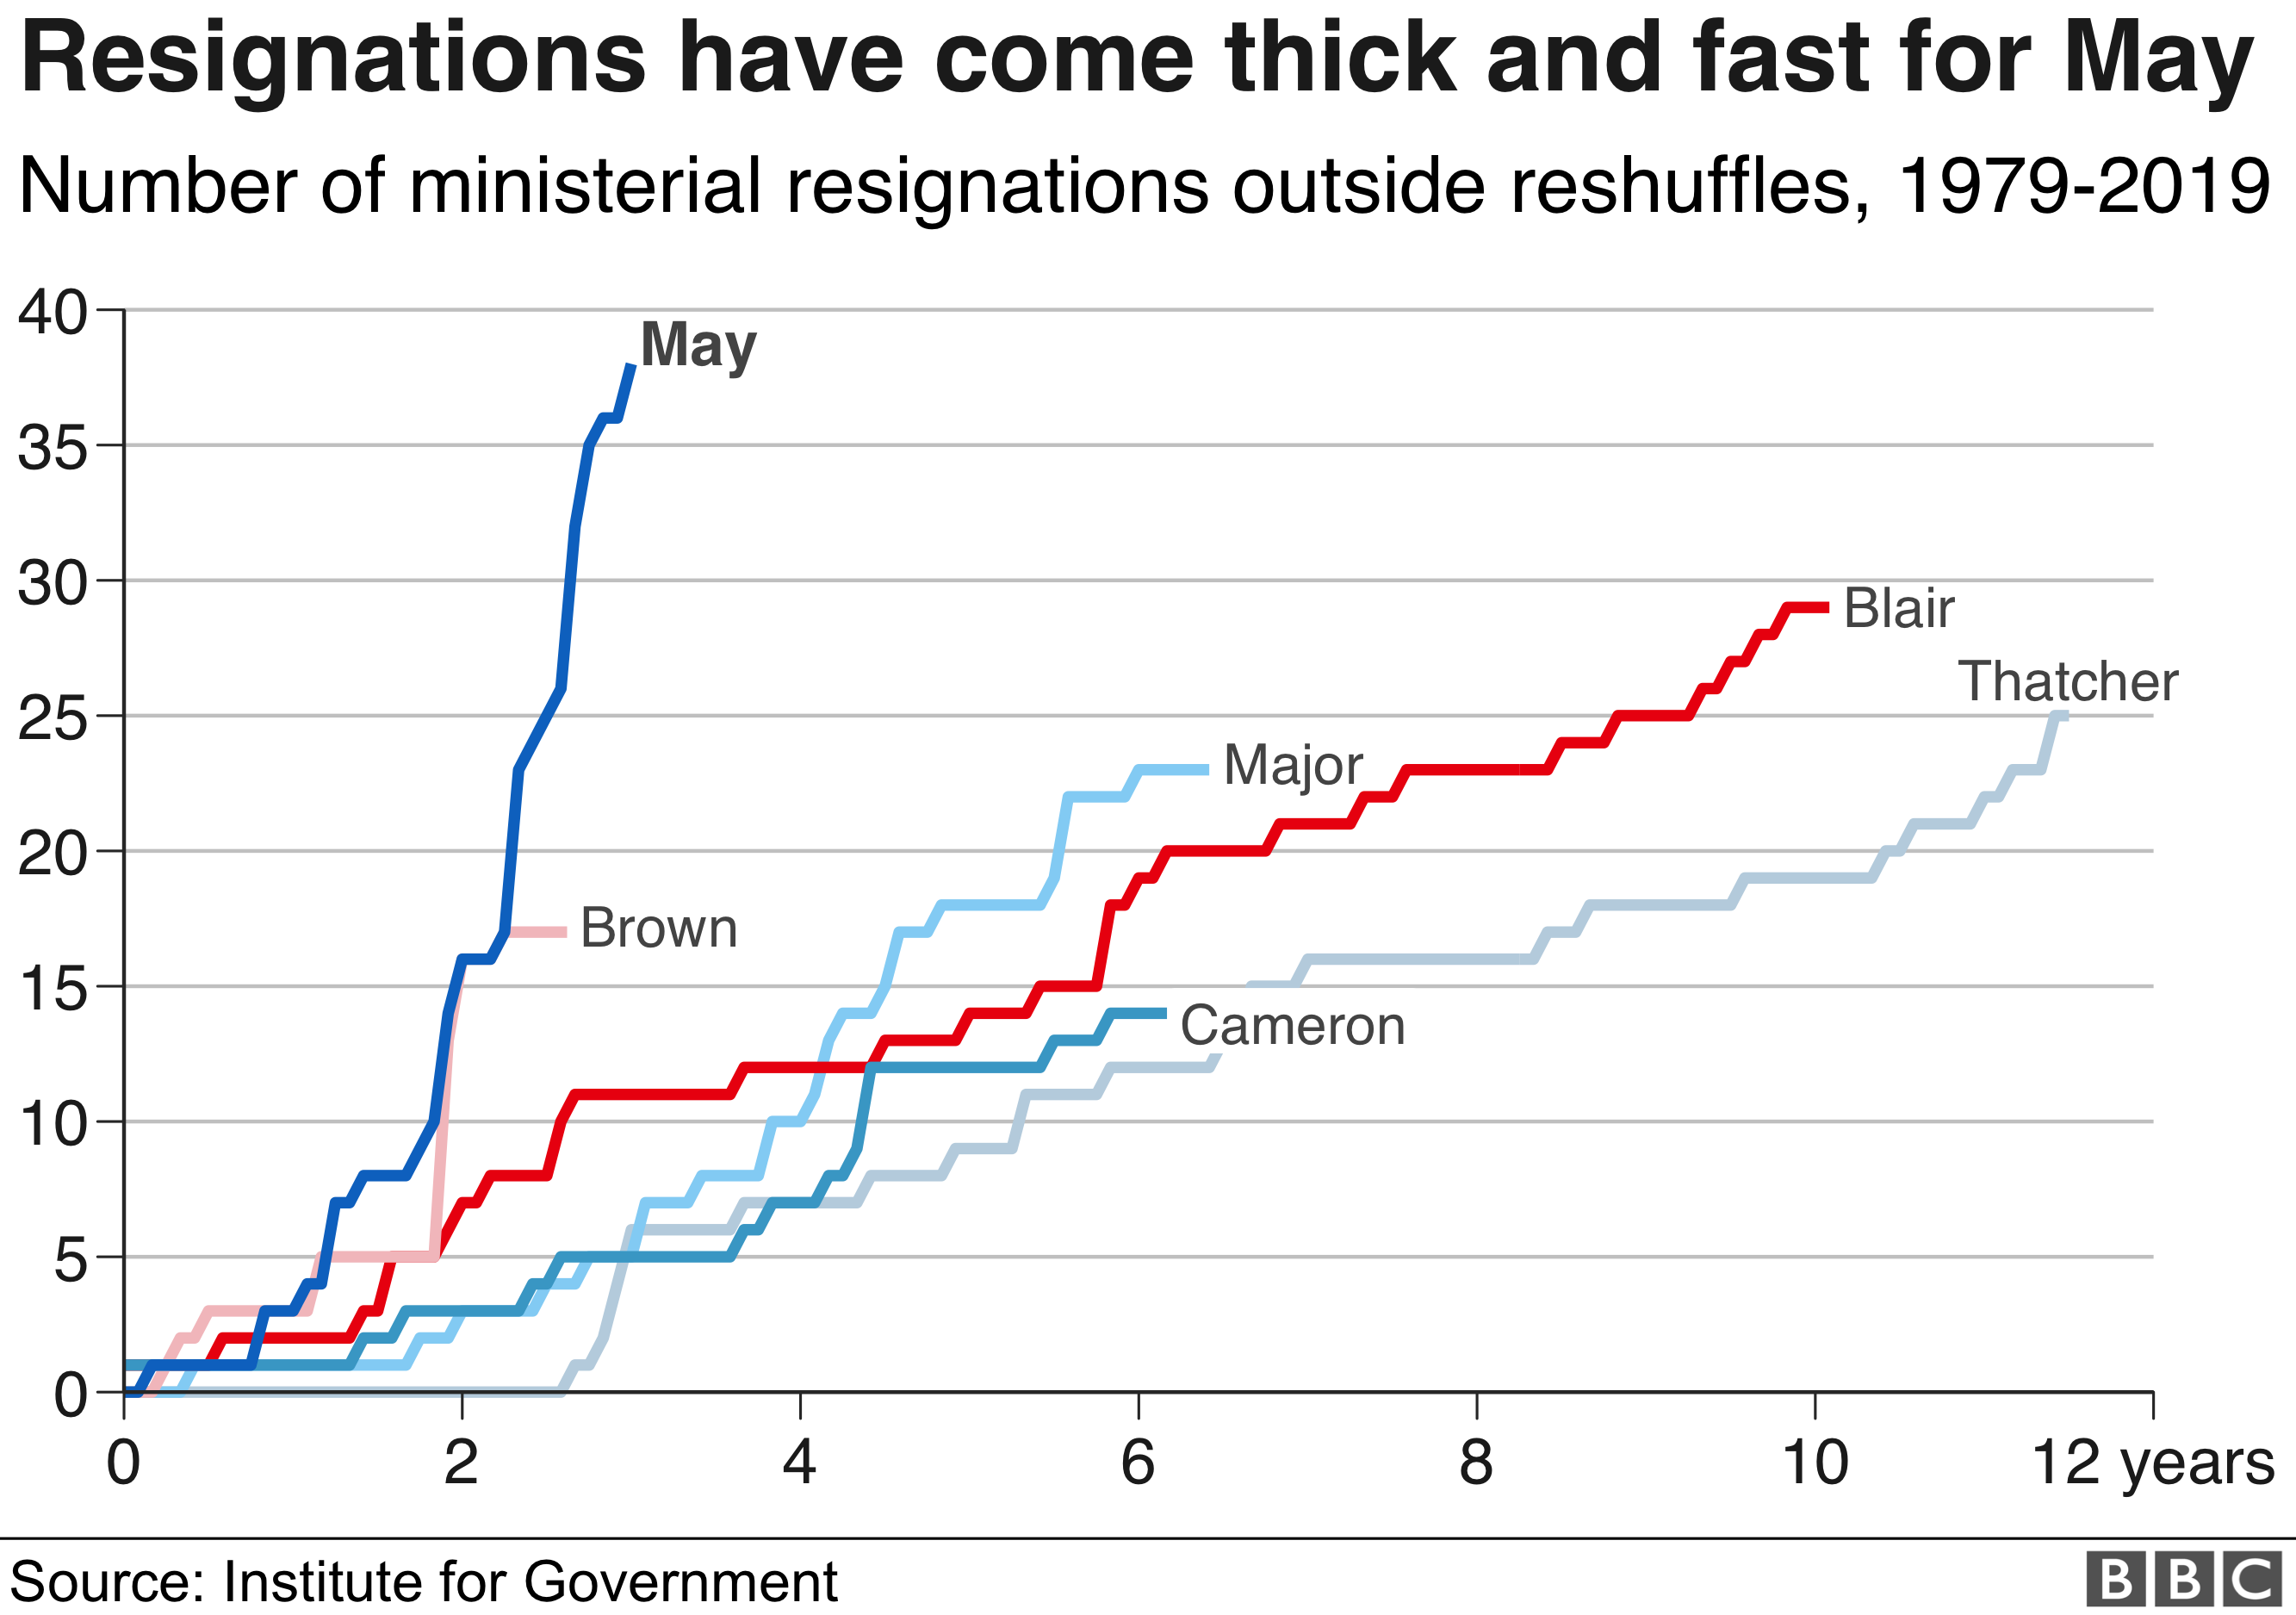 Chart comparing ministerial resignations for Theresa May and predecessors